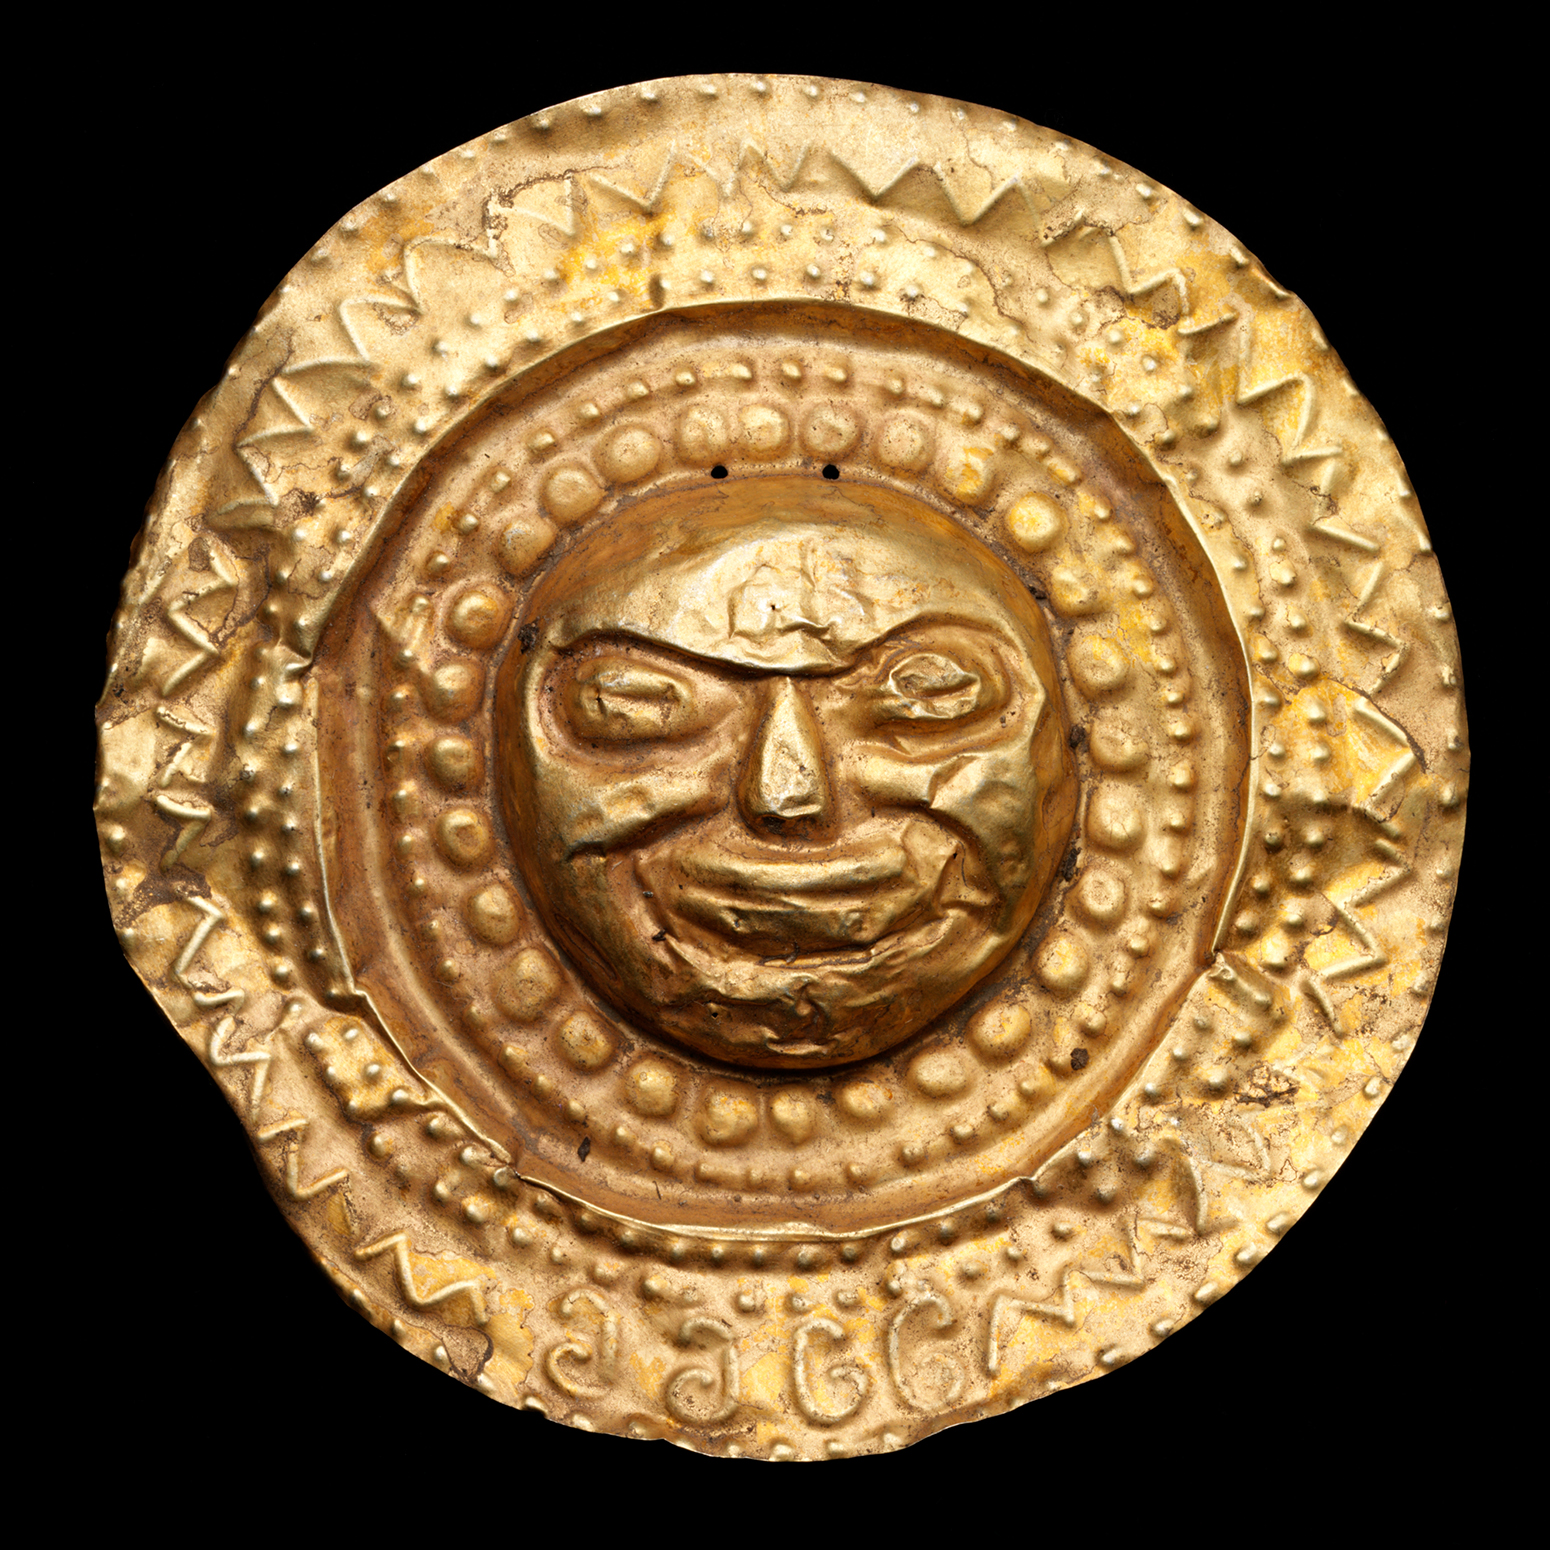 A gold medallion with a small face at the center